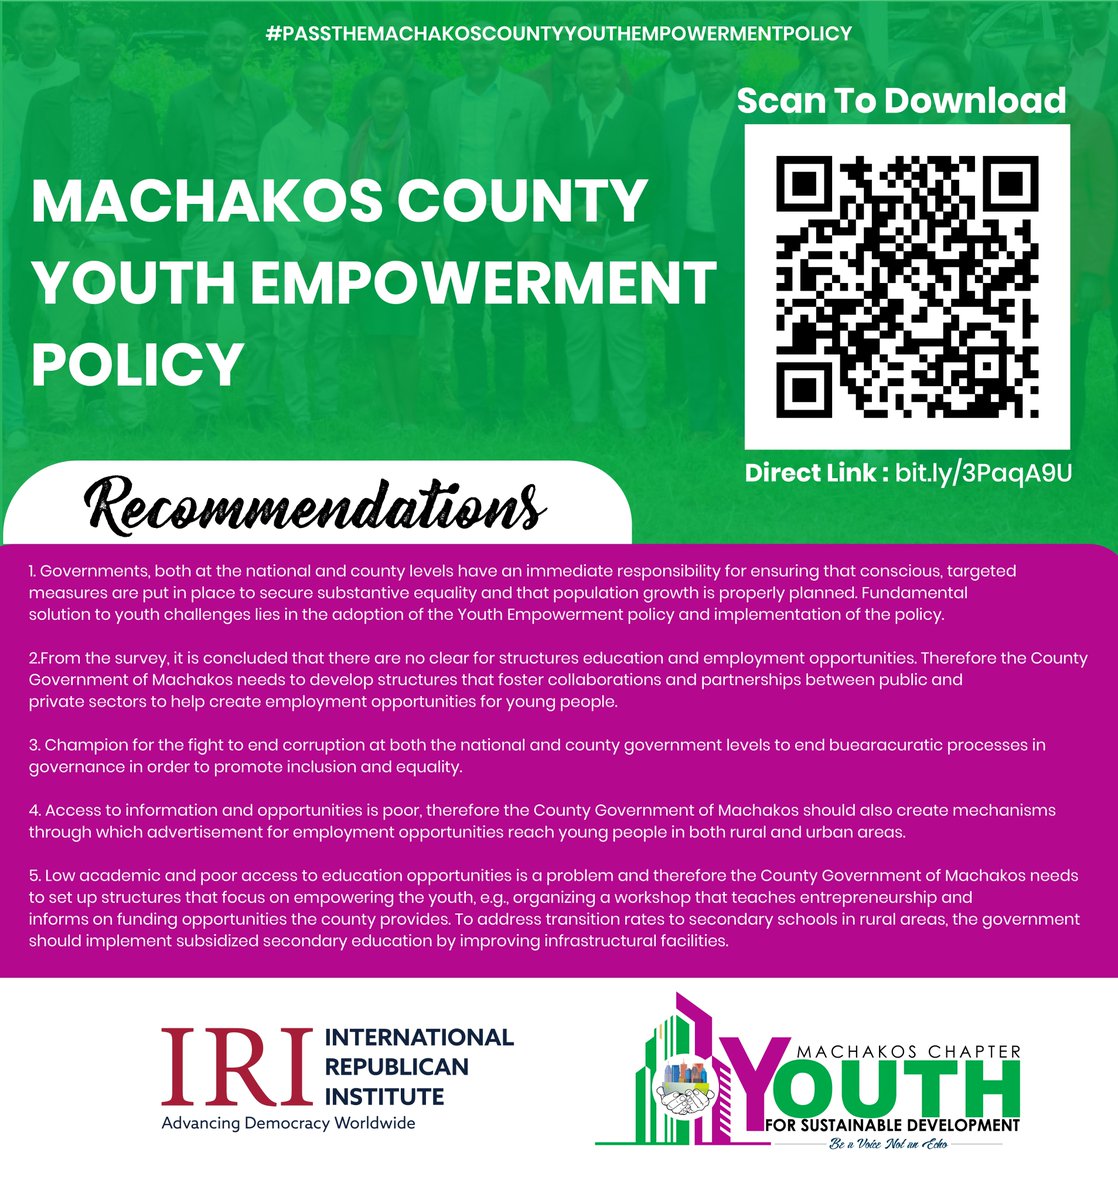 From the Participatory Action Research conducted by International Republican Institute (IRI) Machakos cohort Members and Youth for Sustainable Development, it was concluded that there are no
clear structures that prioritize education and employment opportunities for young people.